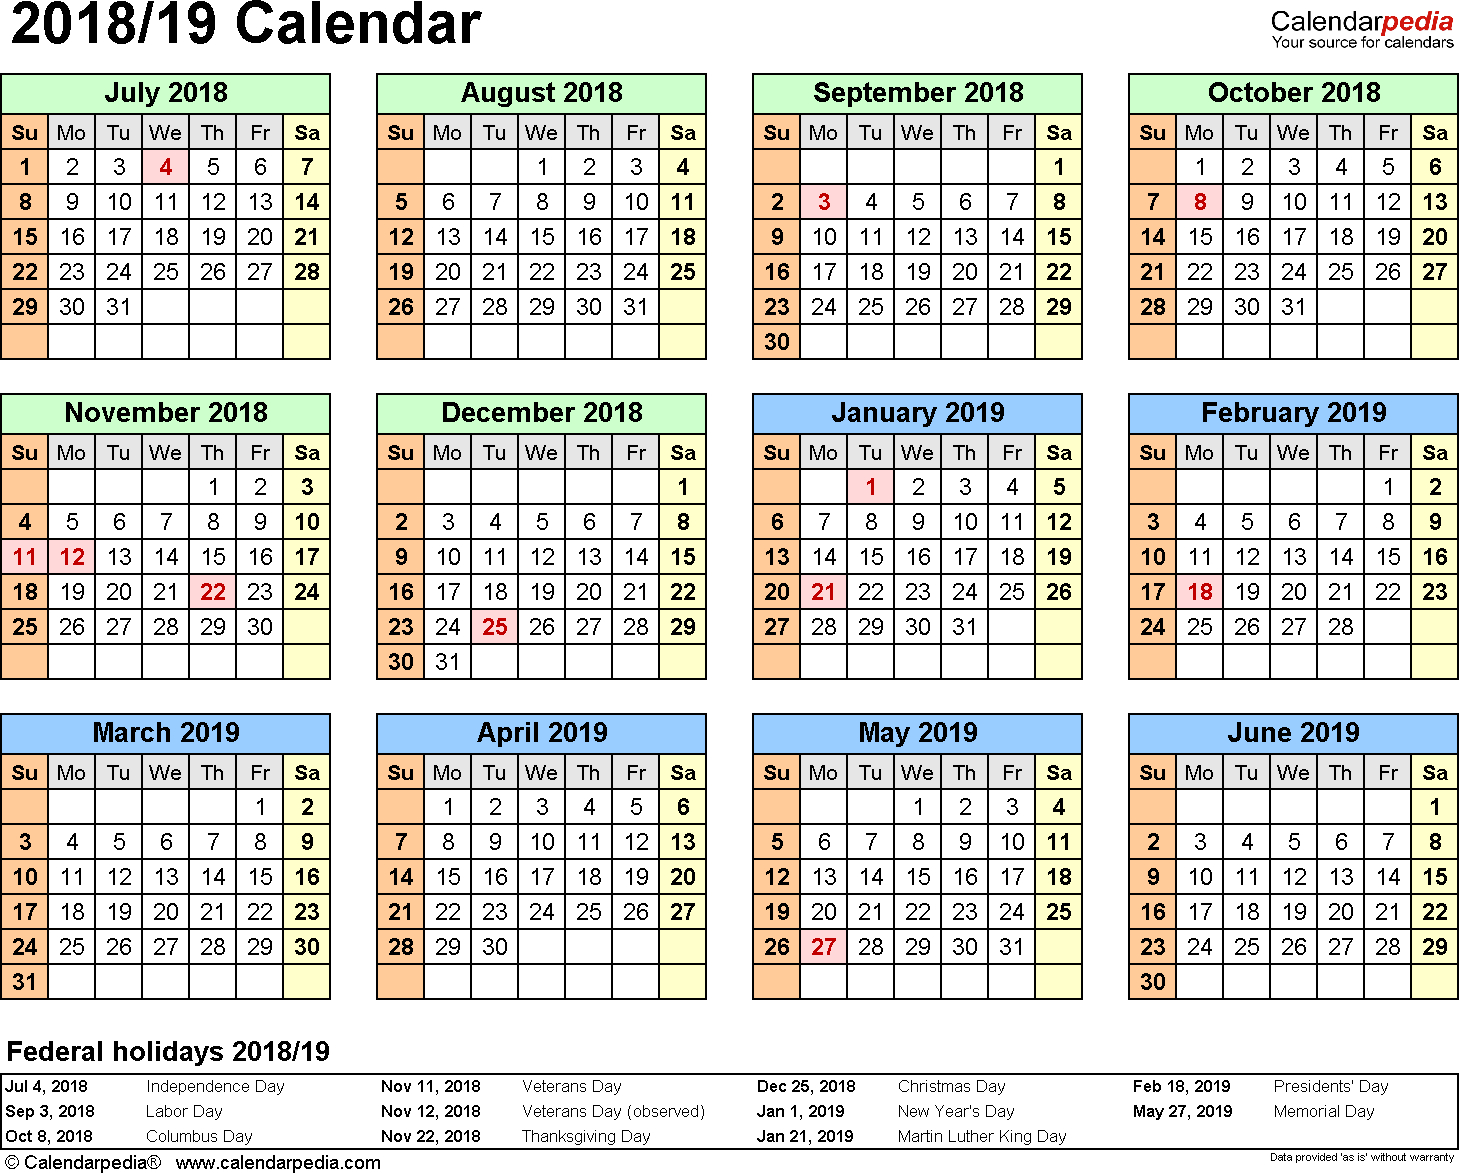 Split Year Calendars 2018/2019 (July To June) - Word Templates